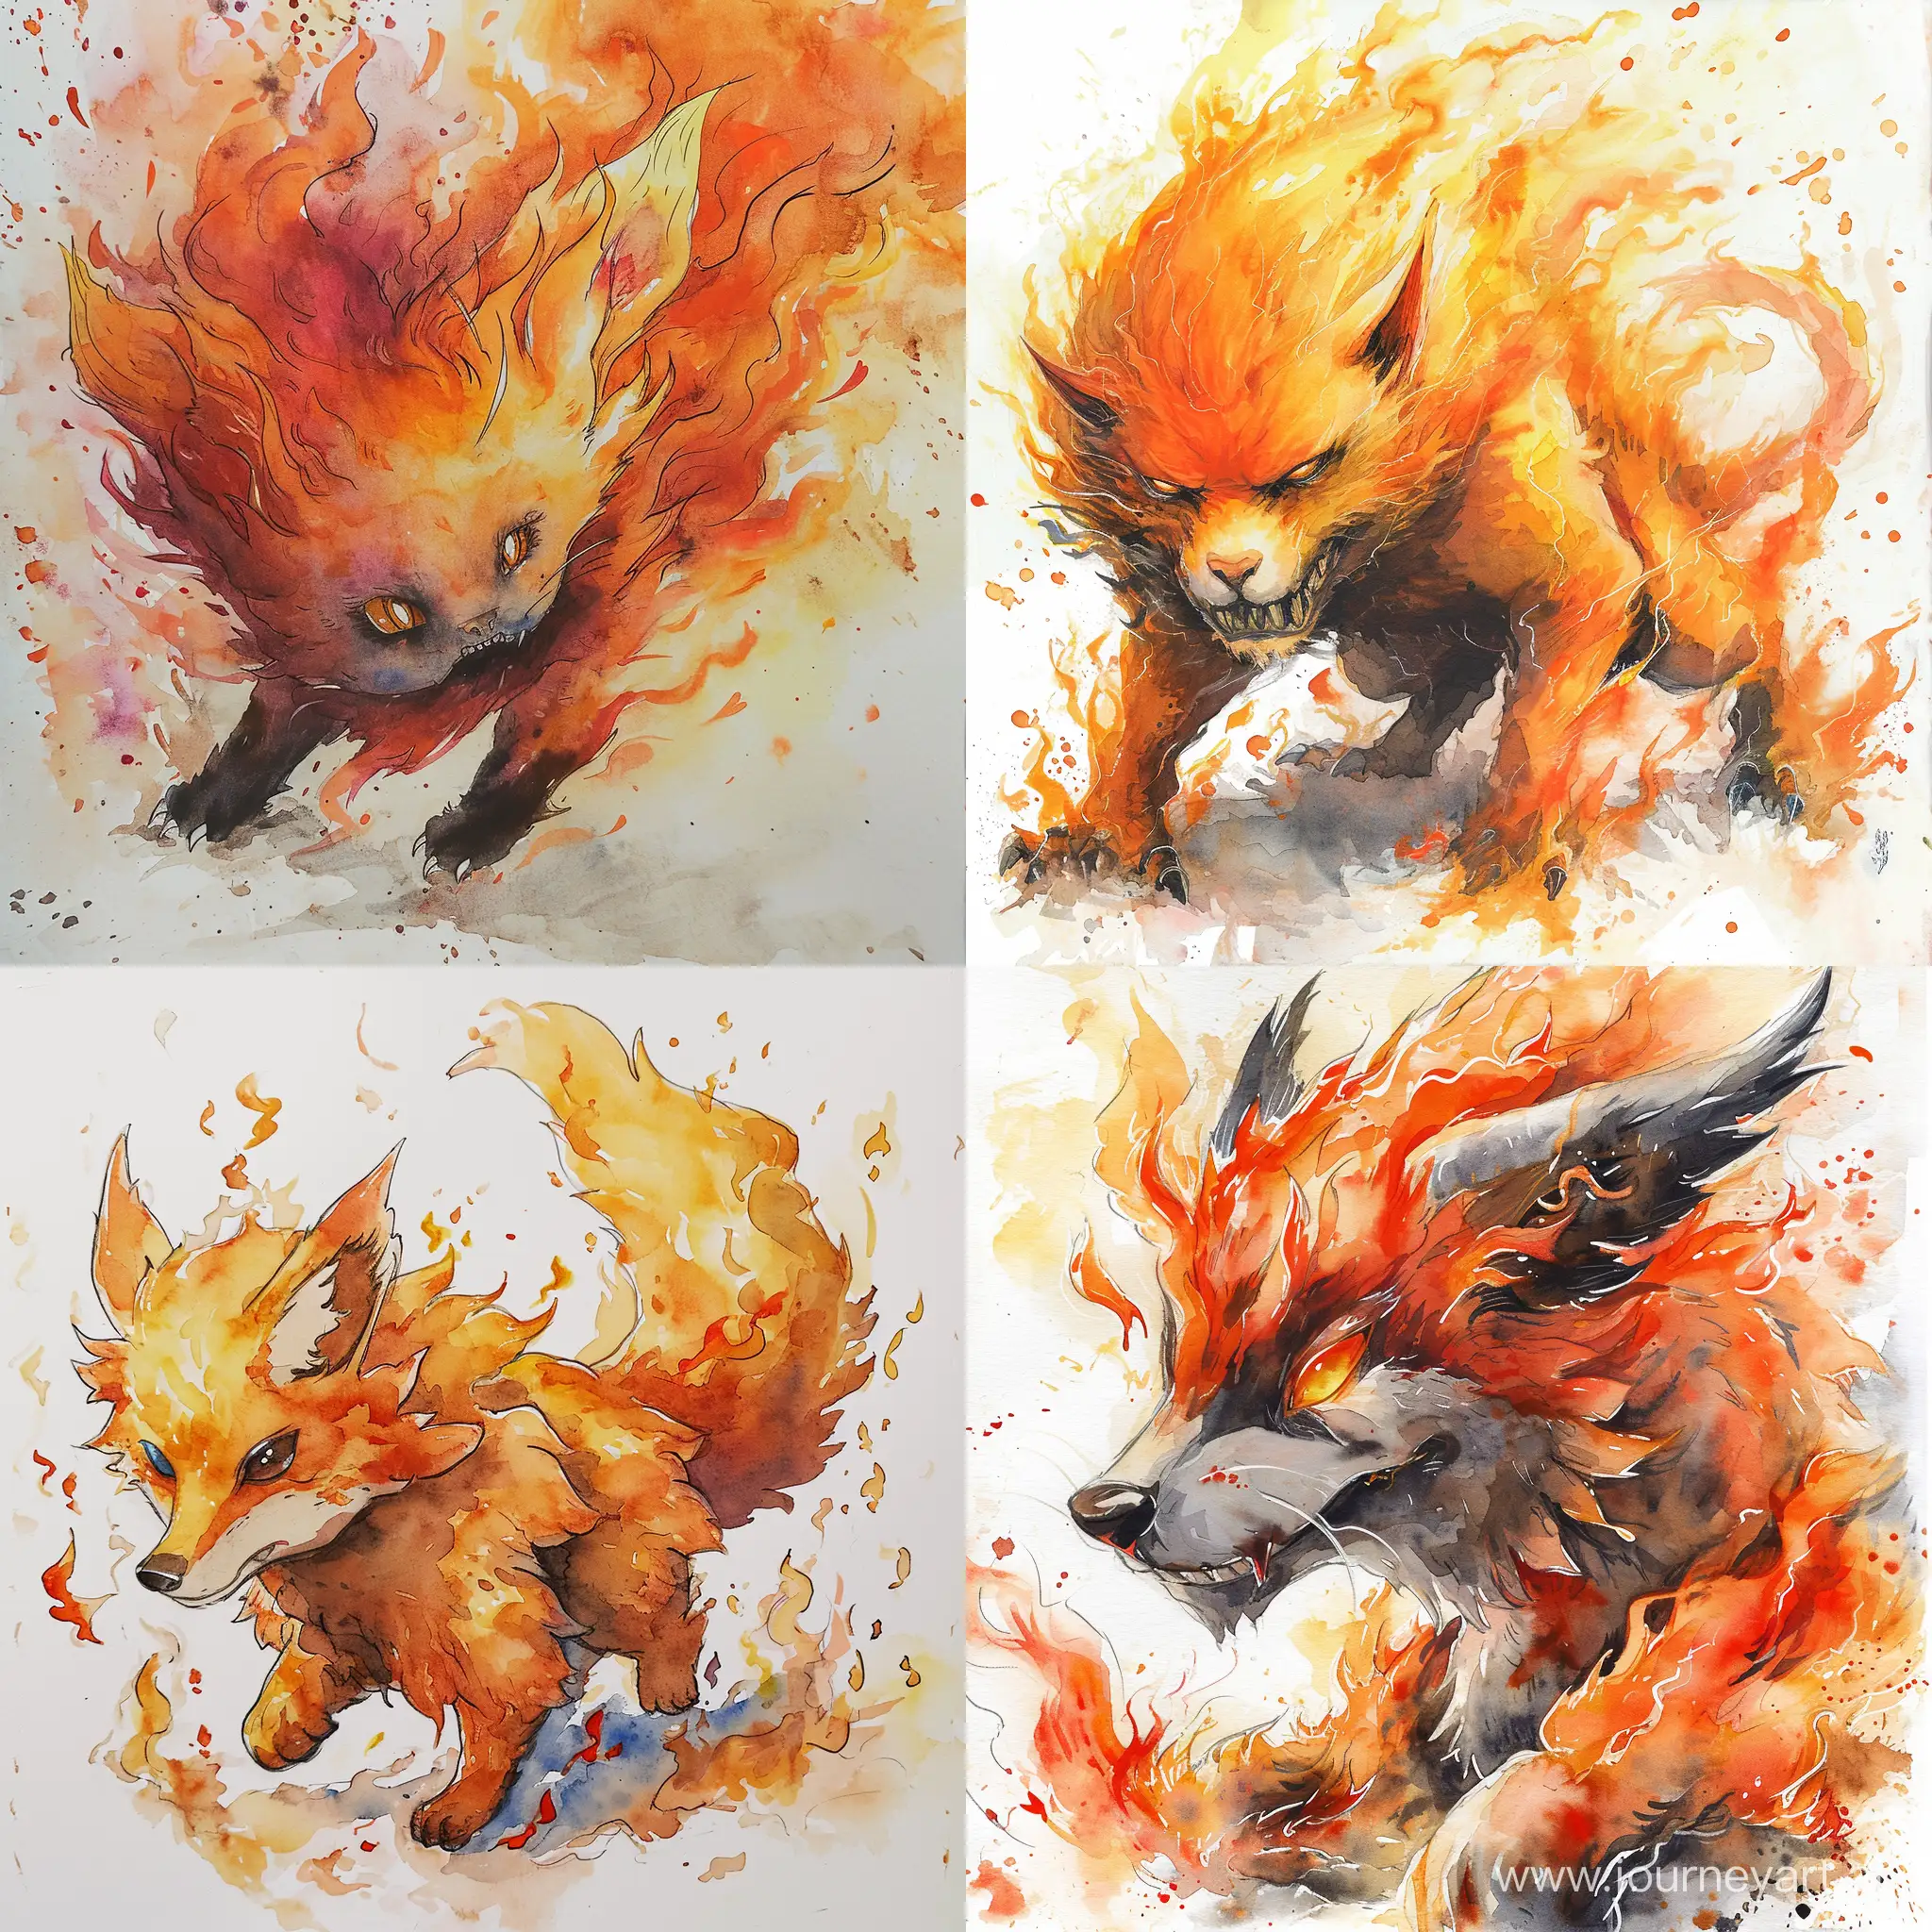 An anime fire animal monster, watercolor